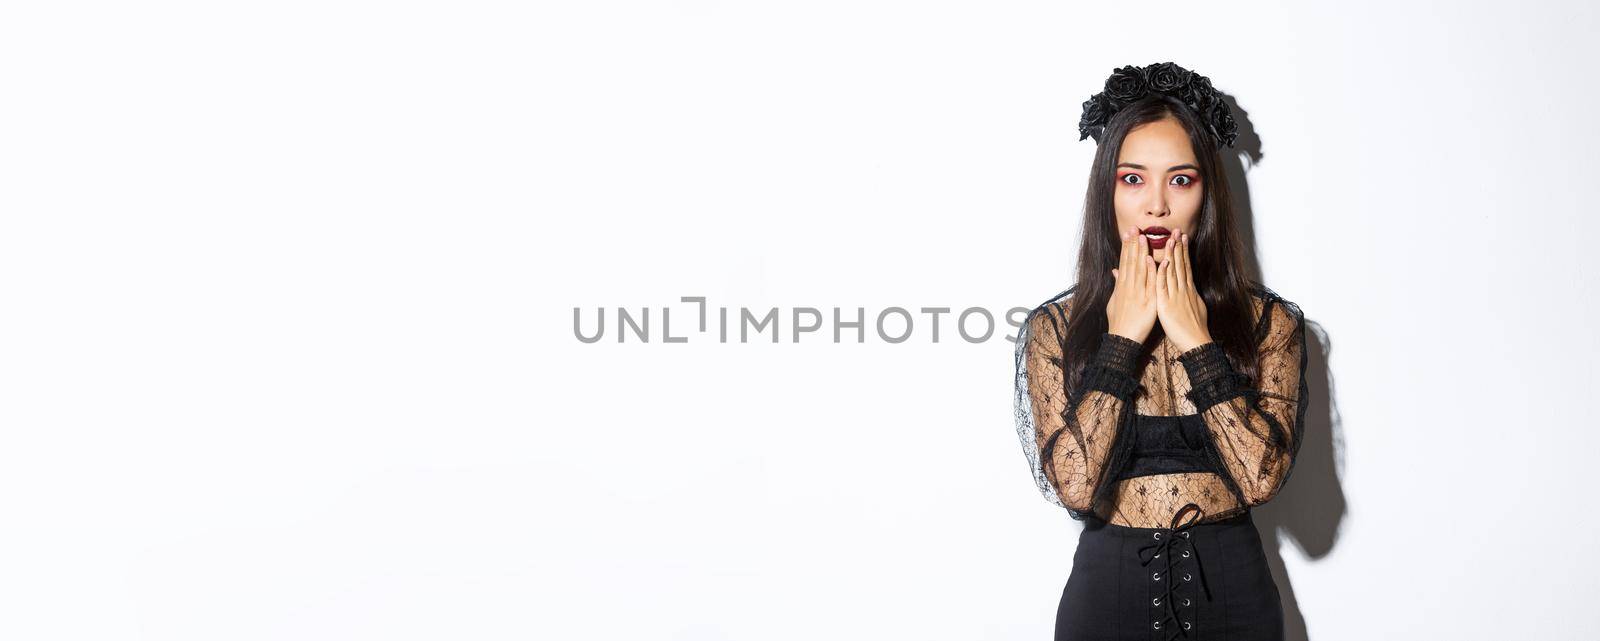 Shocked and startled asian woman, witch in black lace dress looking concerned, gasping and looking at camera amazed, standing over white background.